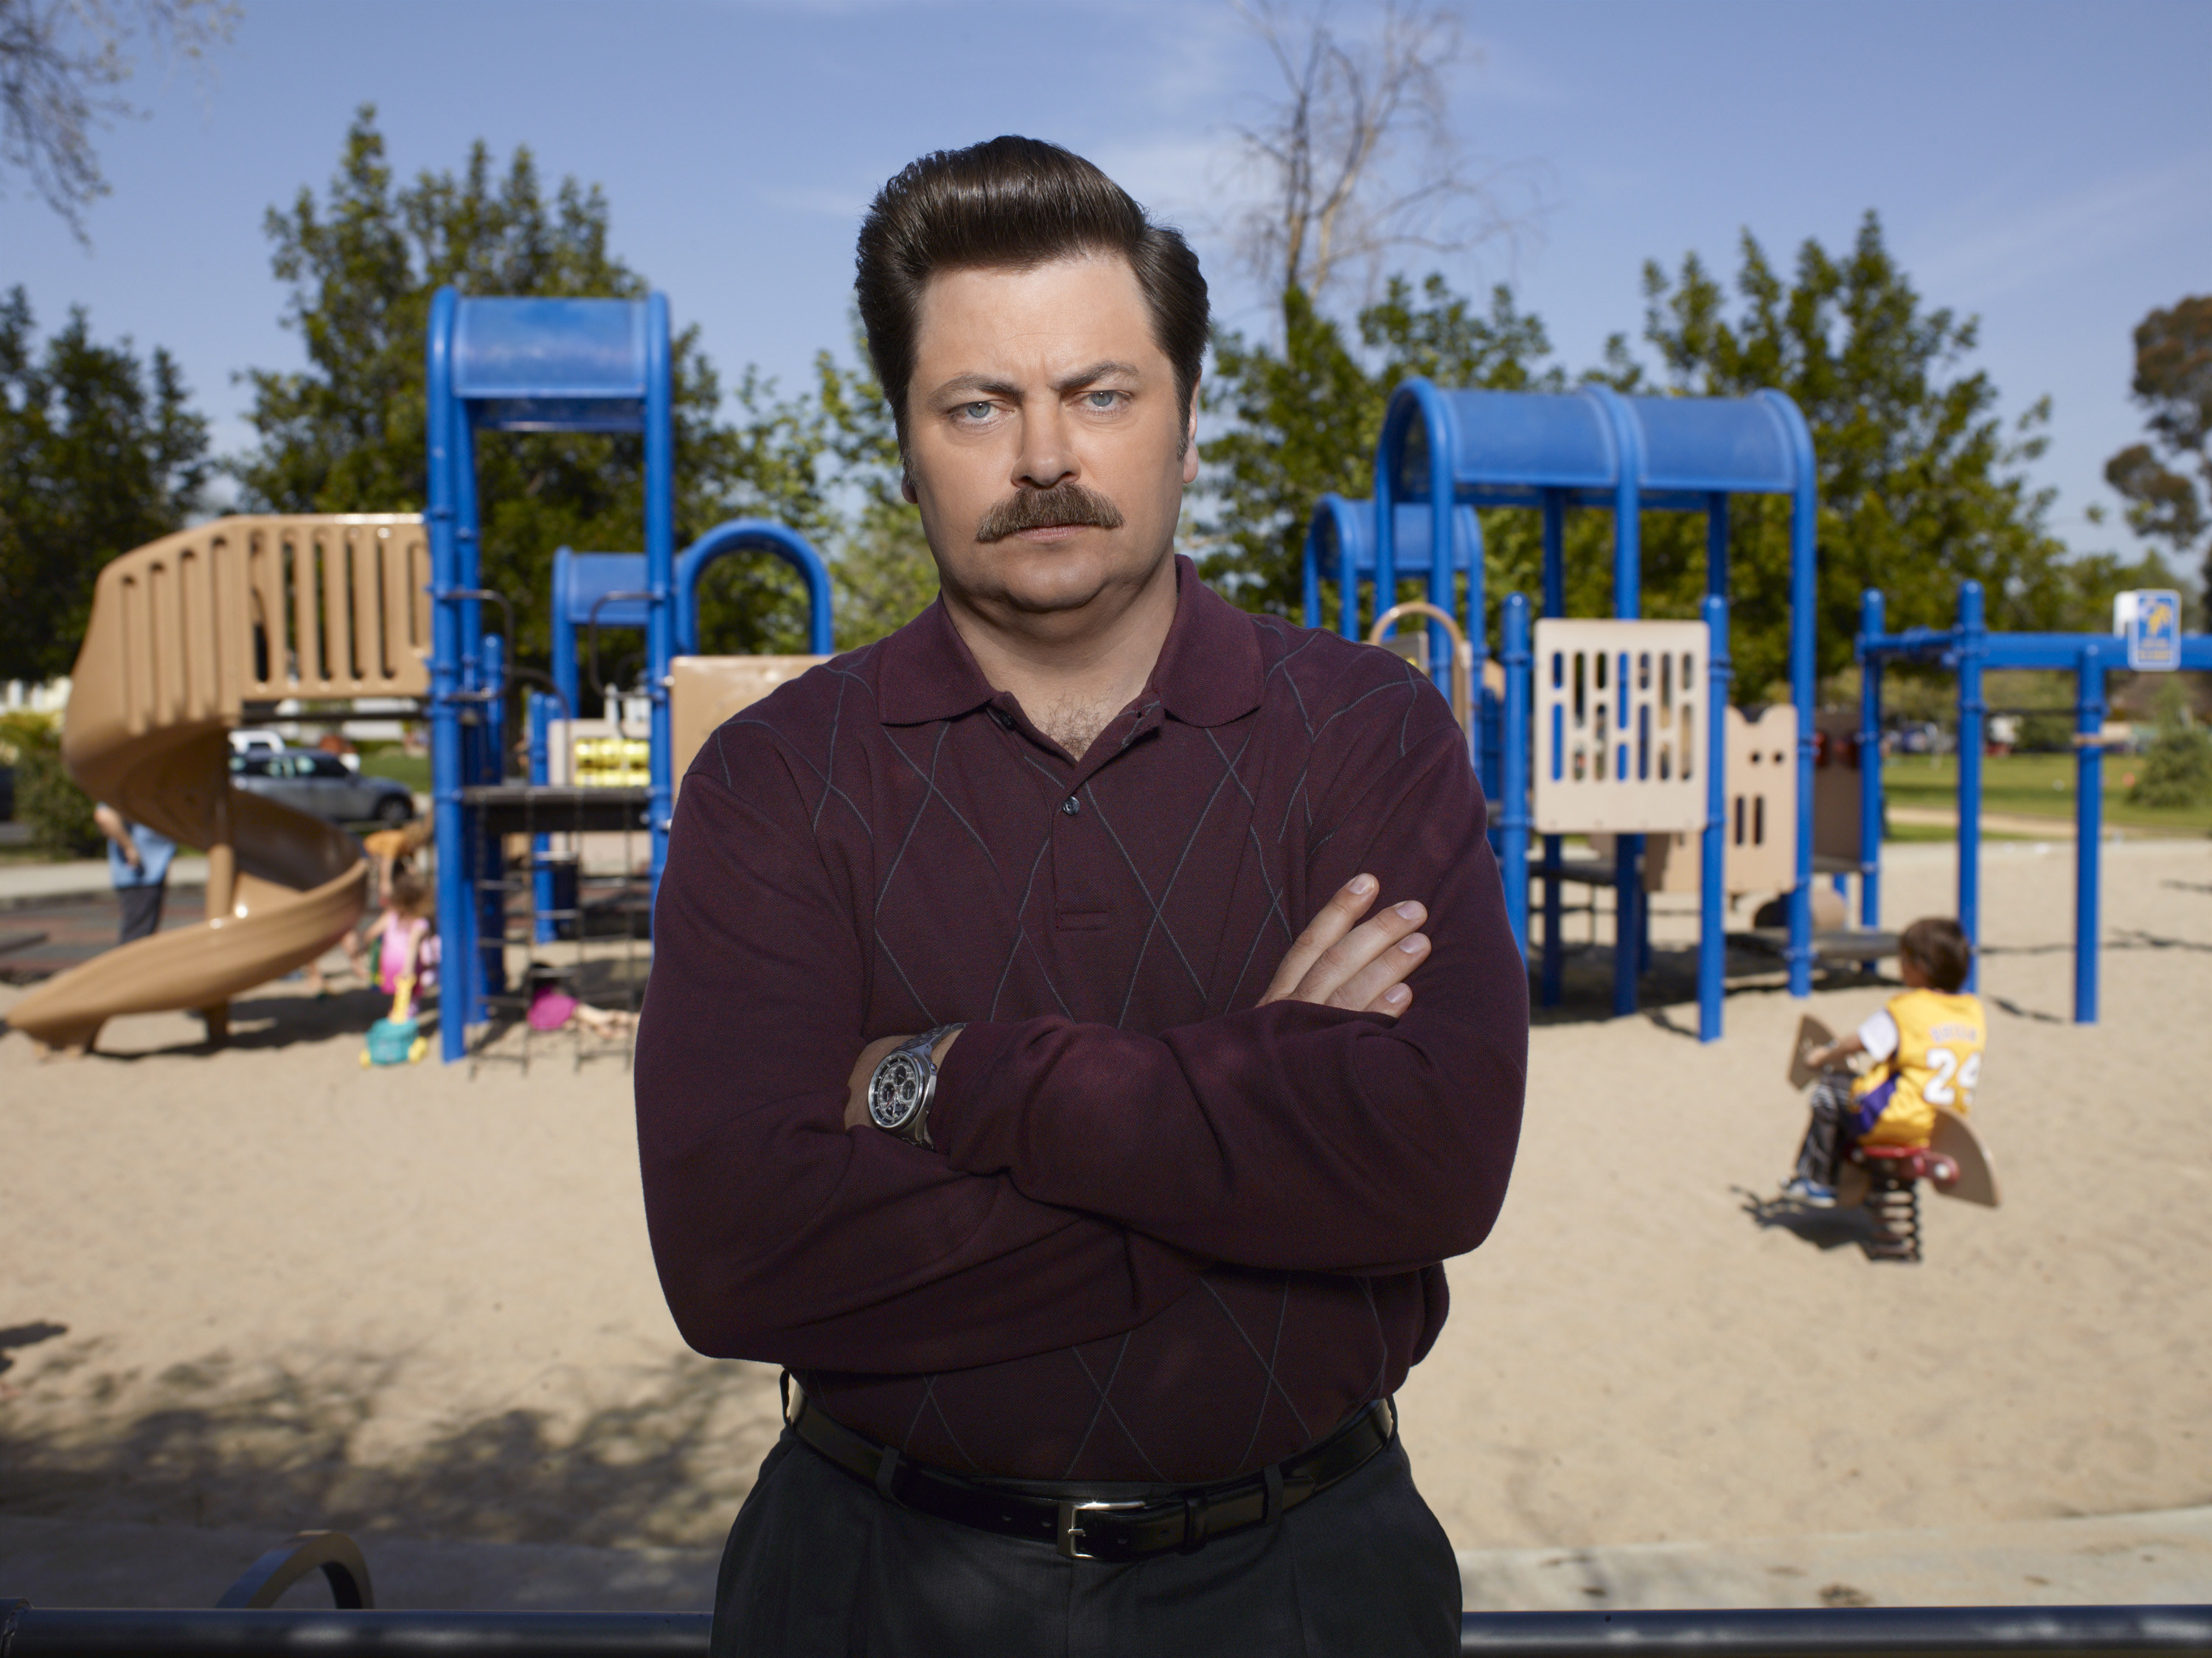 Ron Swanson from &quot;Parks and Recreation&quot; standing in front of a playground